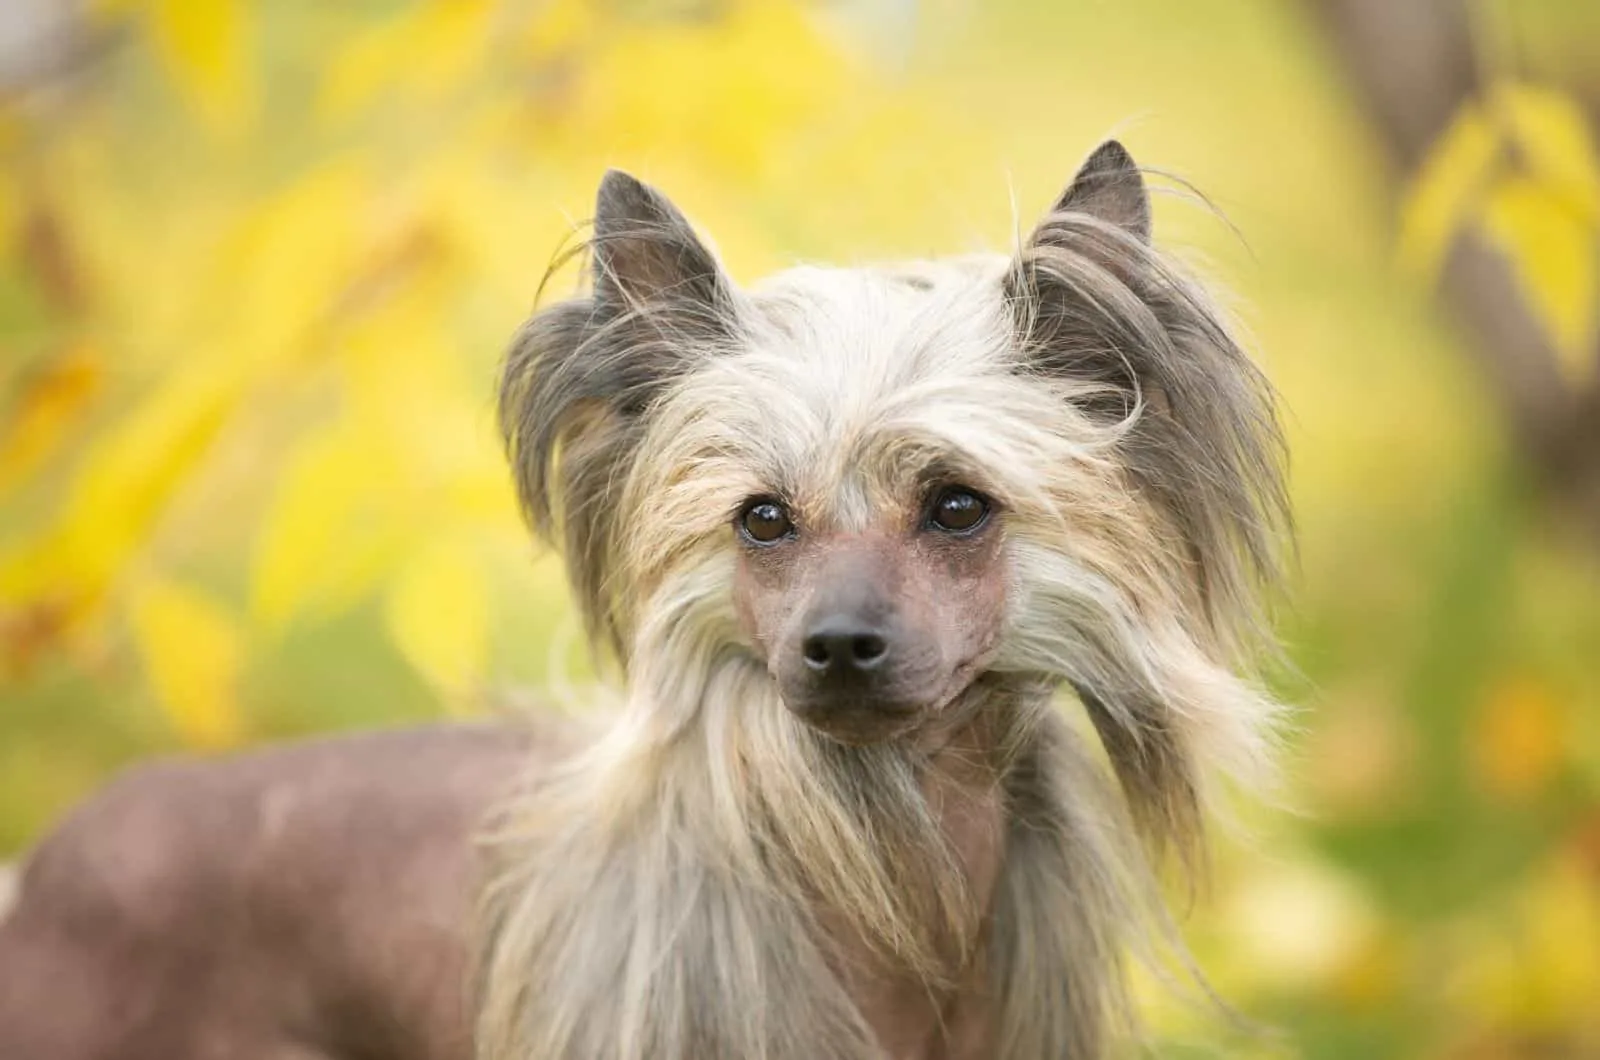 Chinese Crested dog posing for camera